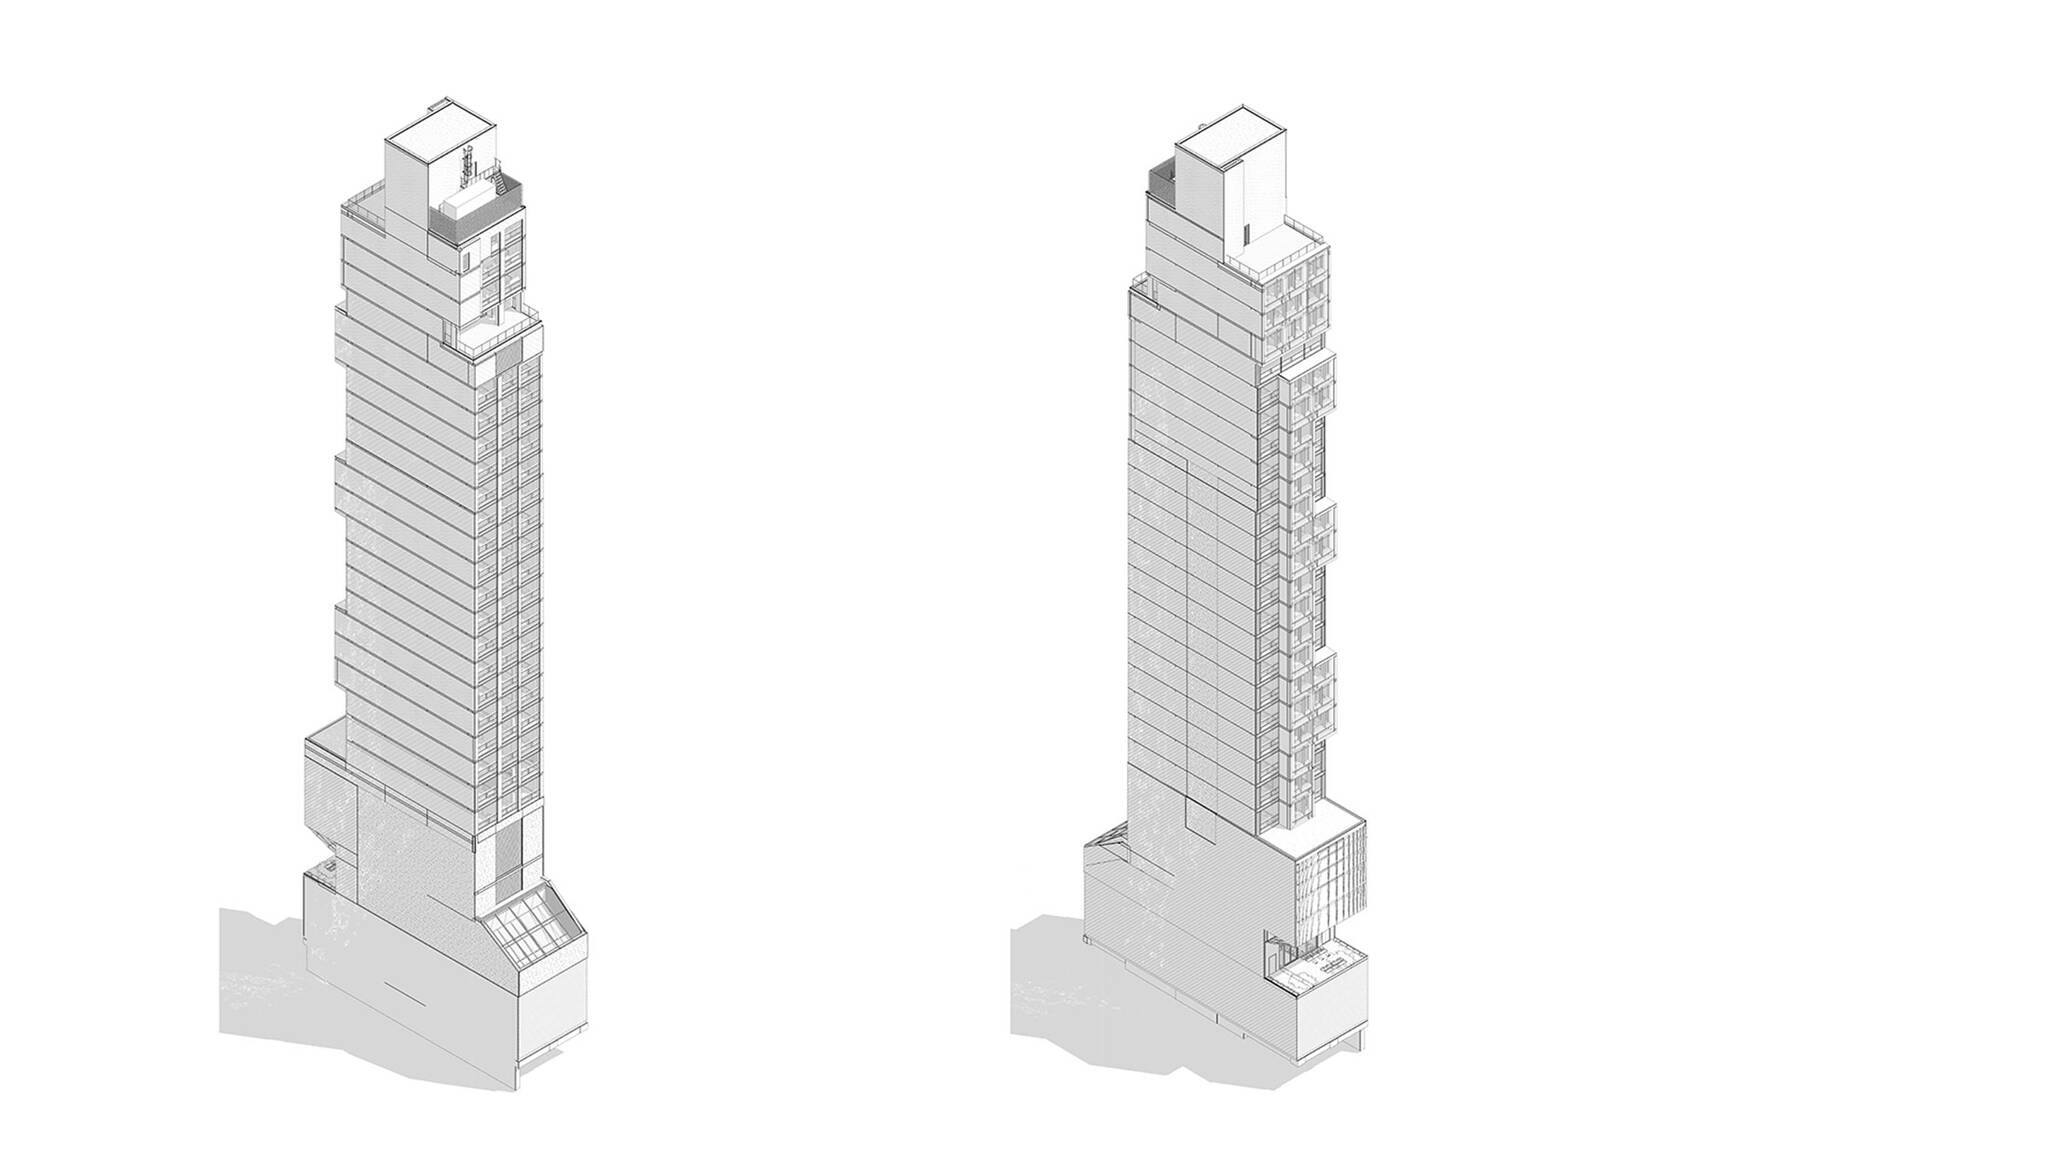 Axonometric view of the Brooklyn Motto Hotel project, a modular hotel tower on Schermerhorn Street in Brooklyn, New York designed by the architecture studio Danny Forster & Architecture